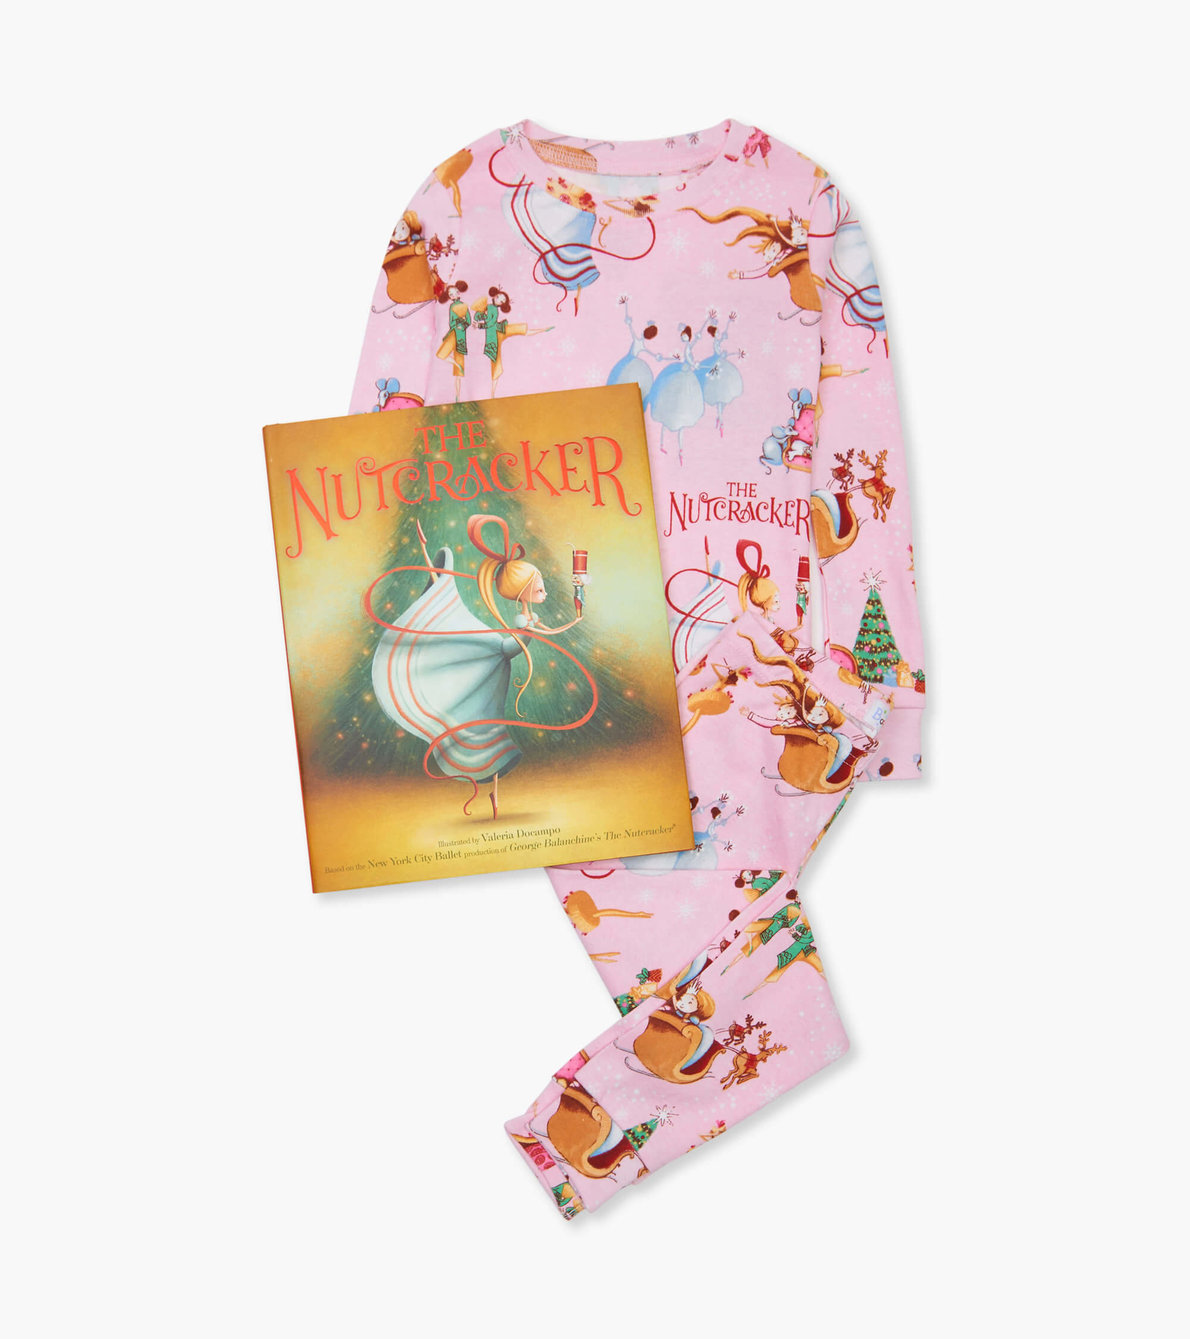 View larger image of The Nutcracker Book and Pajama Set